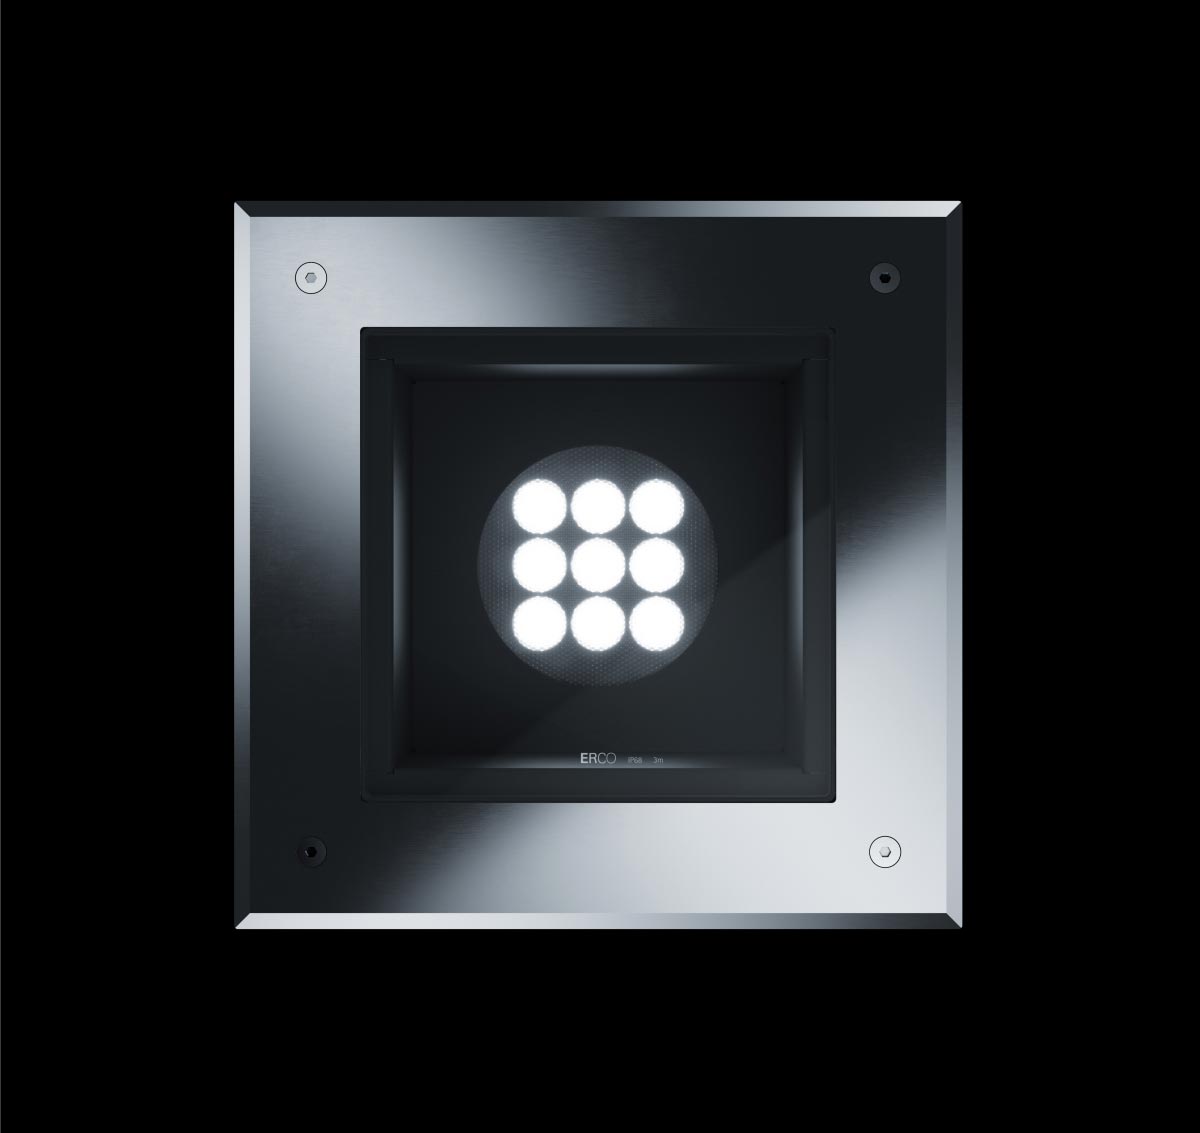 Tesis IP68 Square In-ground Luminaire Uplight Wide Flood Beam 12W LED 4000K ECG Stainless Steel Covered Trim